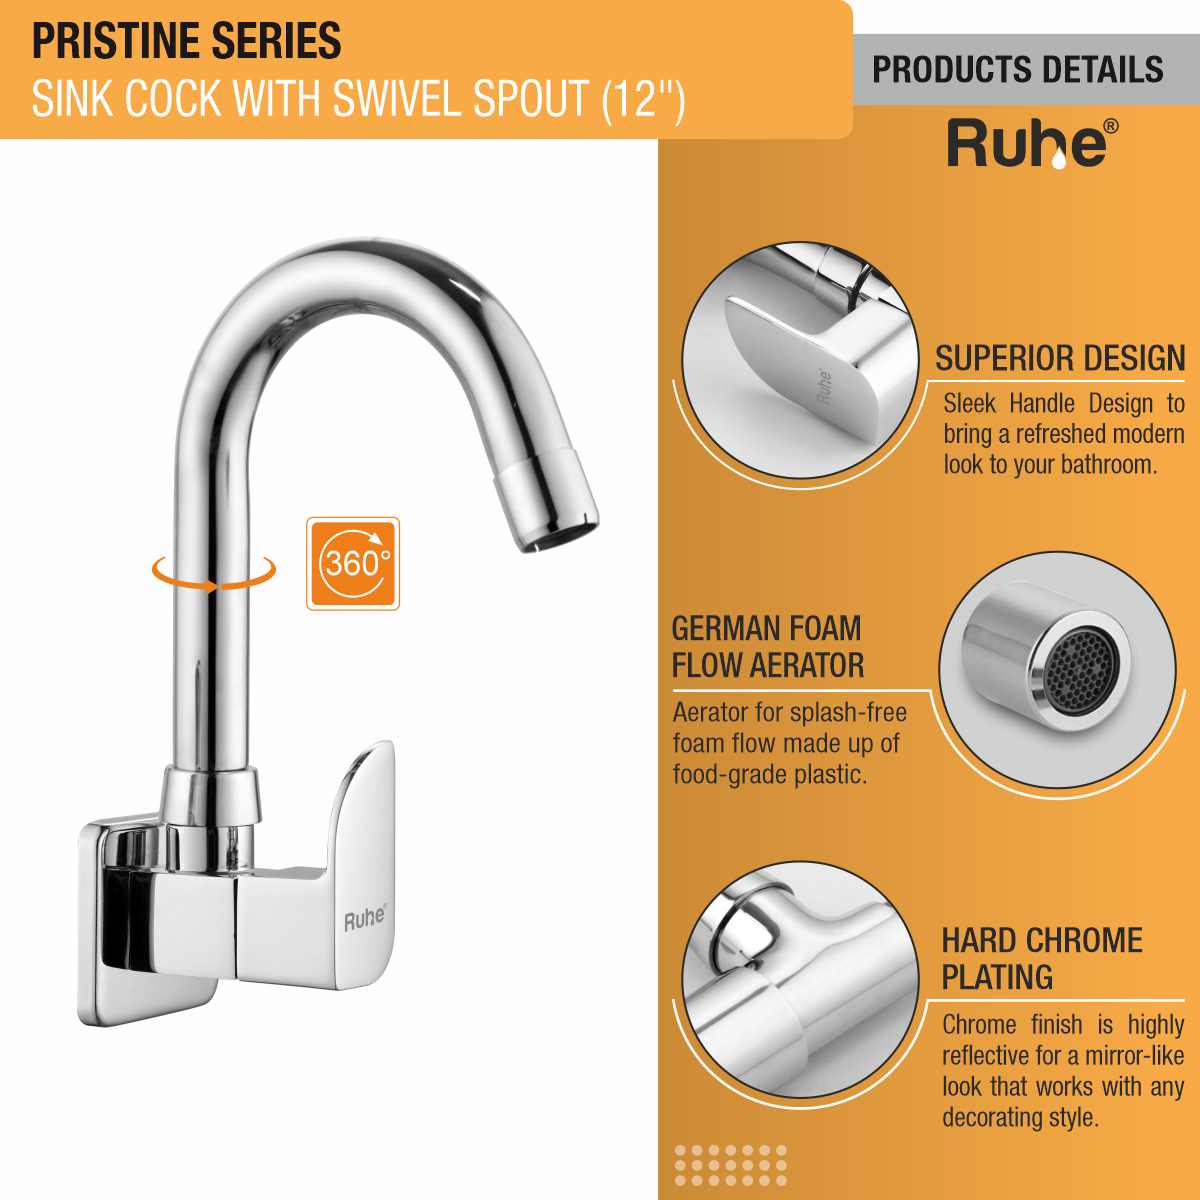 Pristine Sink Tap with Small (12 inches) Round Swivel Spout Brass Faucet product details